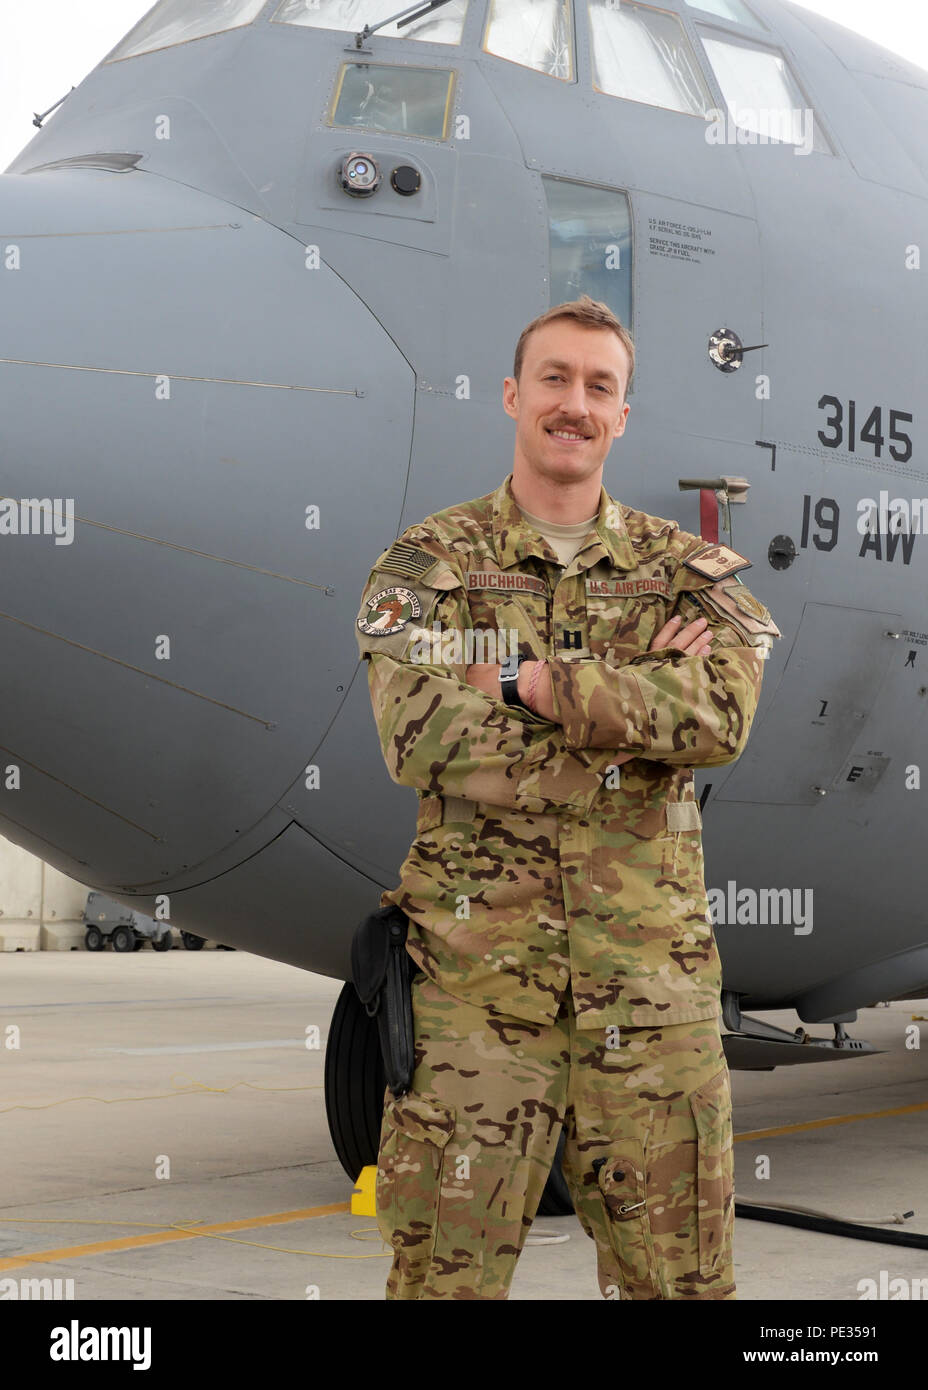 U.S. Air Force Capt. Matt Buchholtz, 774th Expeditionary Airlift Squadron C-130J Super Hercules pilot, poses for a photo in front of an aircraft Sept. 4, 2015, at Bagram Air Field, Afghanistan. Buchholtz is responsible for transporting mission essential assets as well as passengers to various forward operating bases throughout Afghanistan. (U.S. Air Force photo by Senior Airman Cierra Presentado/Released) Stock Photo